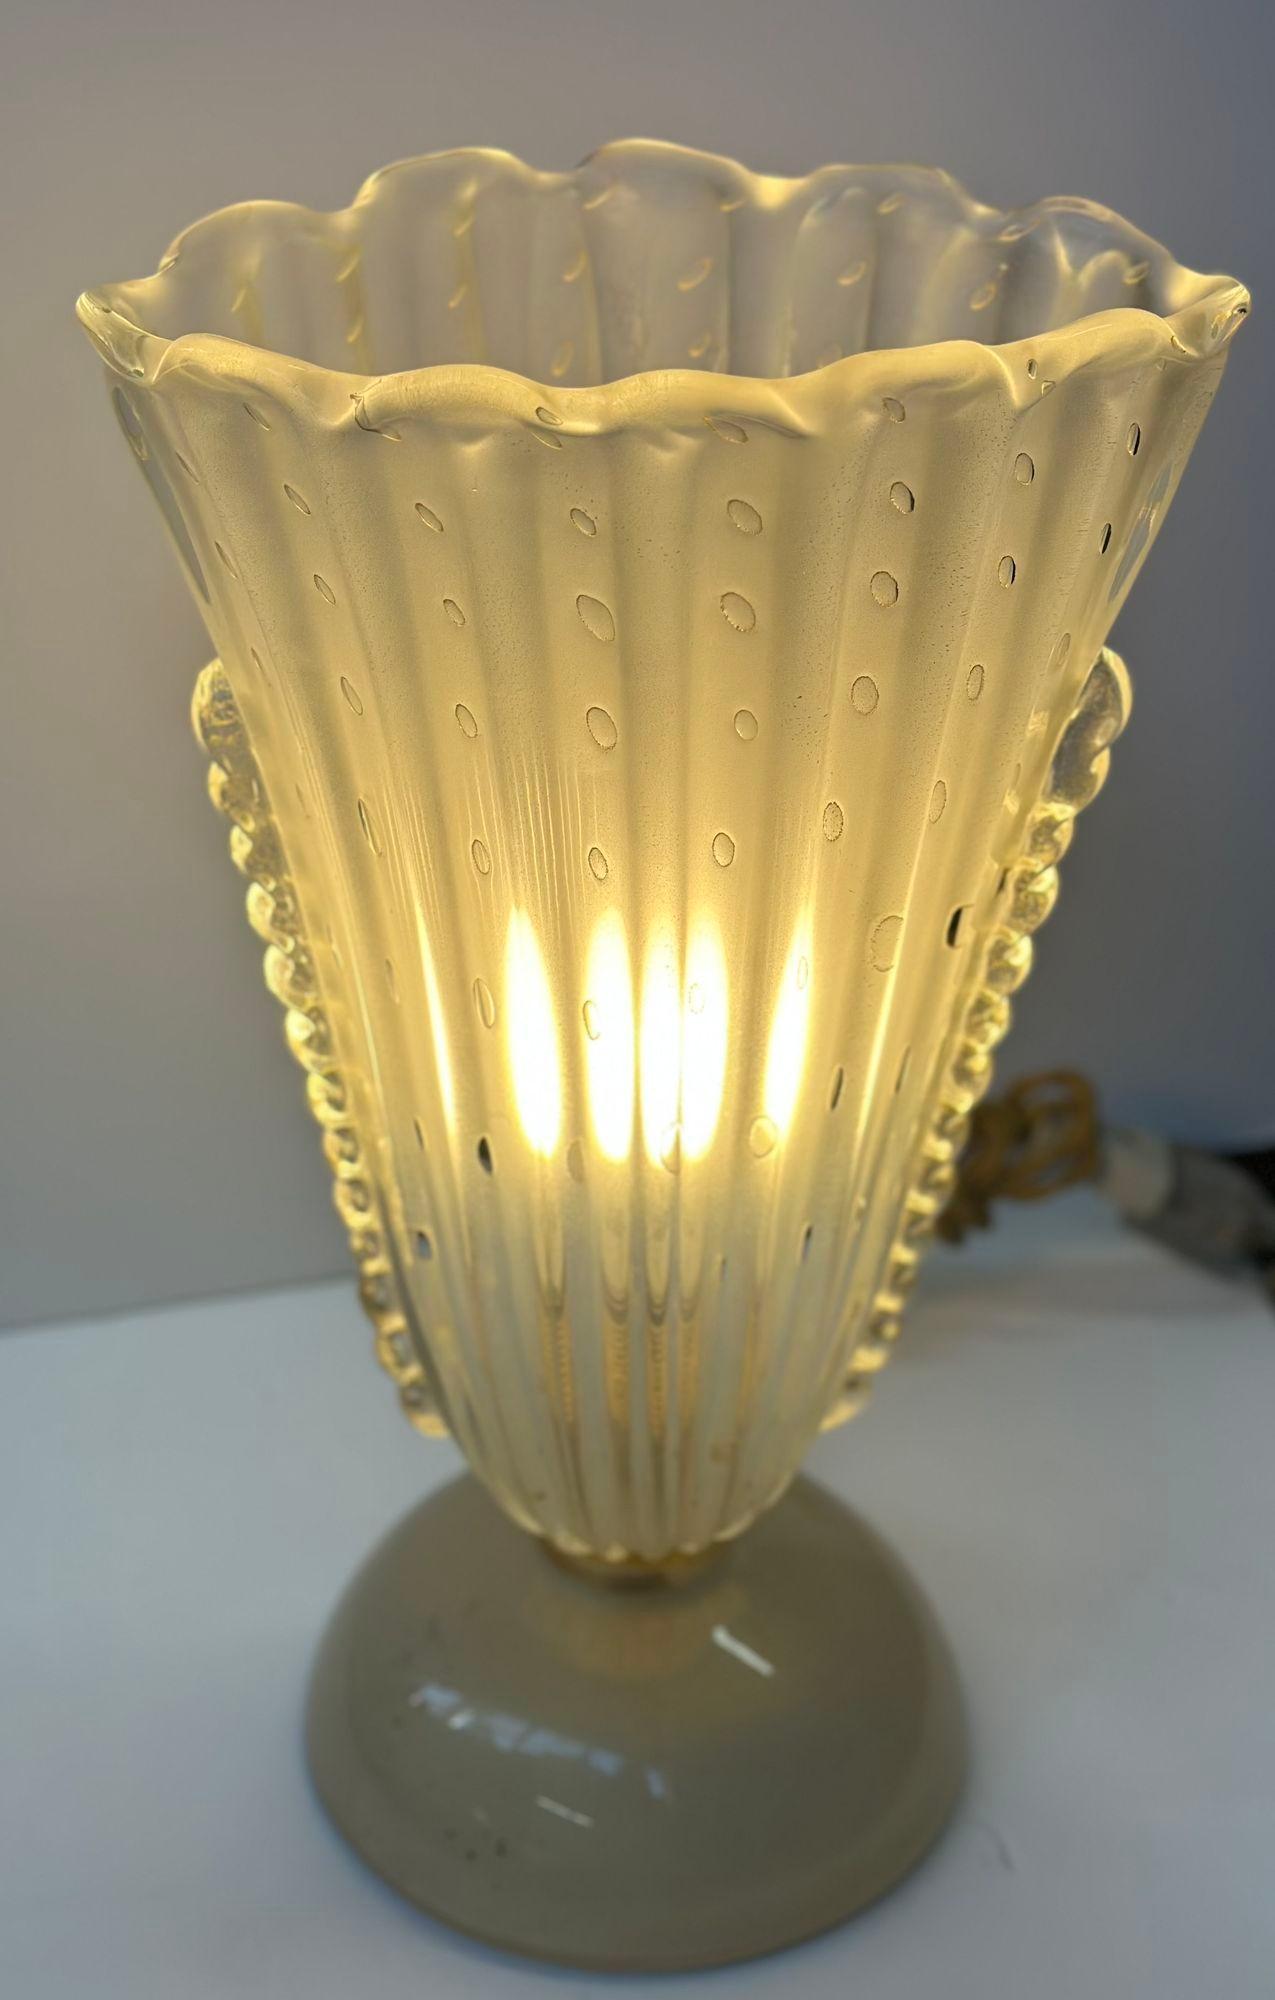 Vintage Italian Murano Table Lamp with Gold Flecks, c. 1970's In Good Condition For Sale In Los Angeles, CA